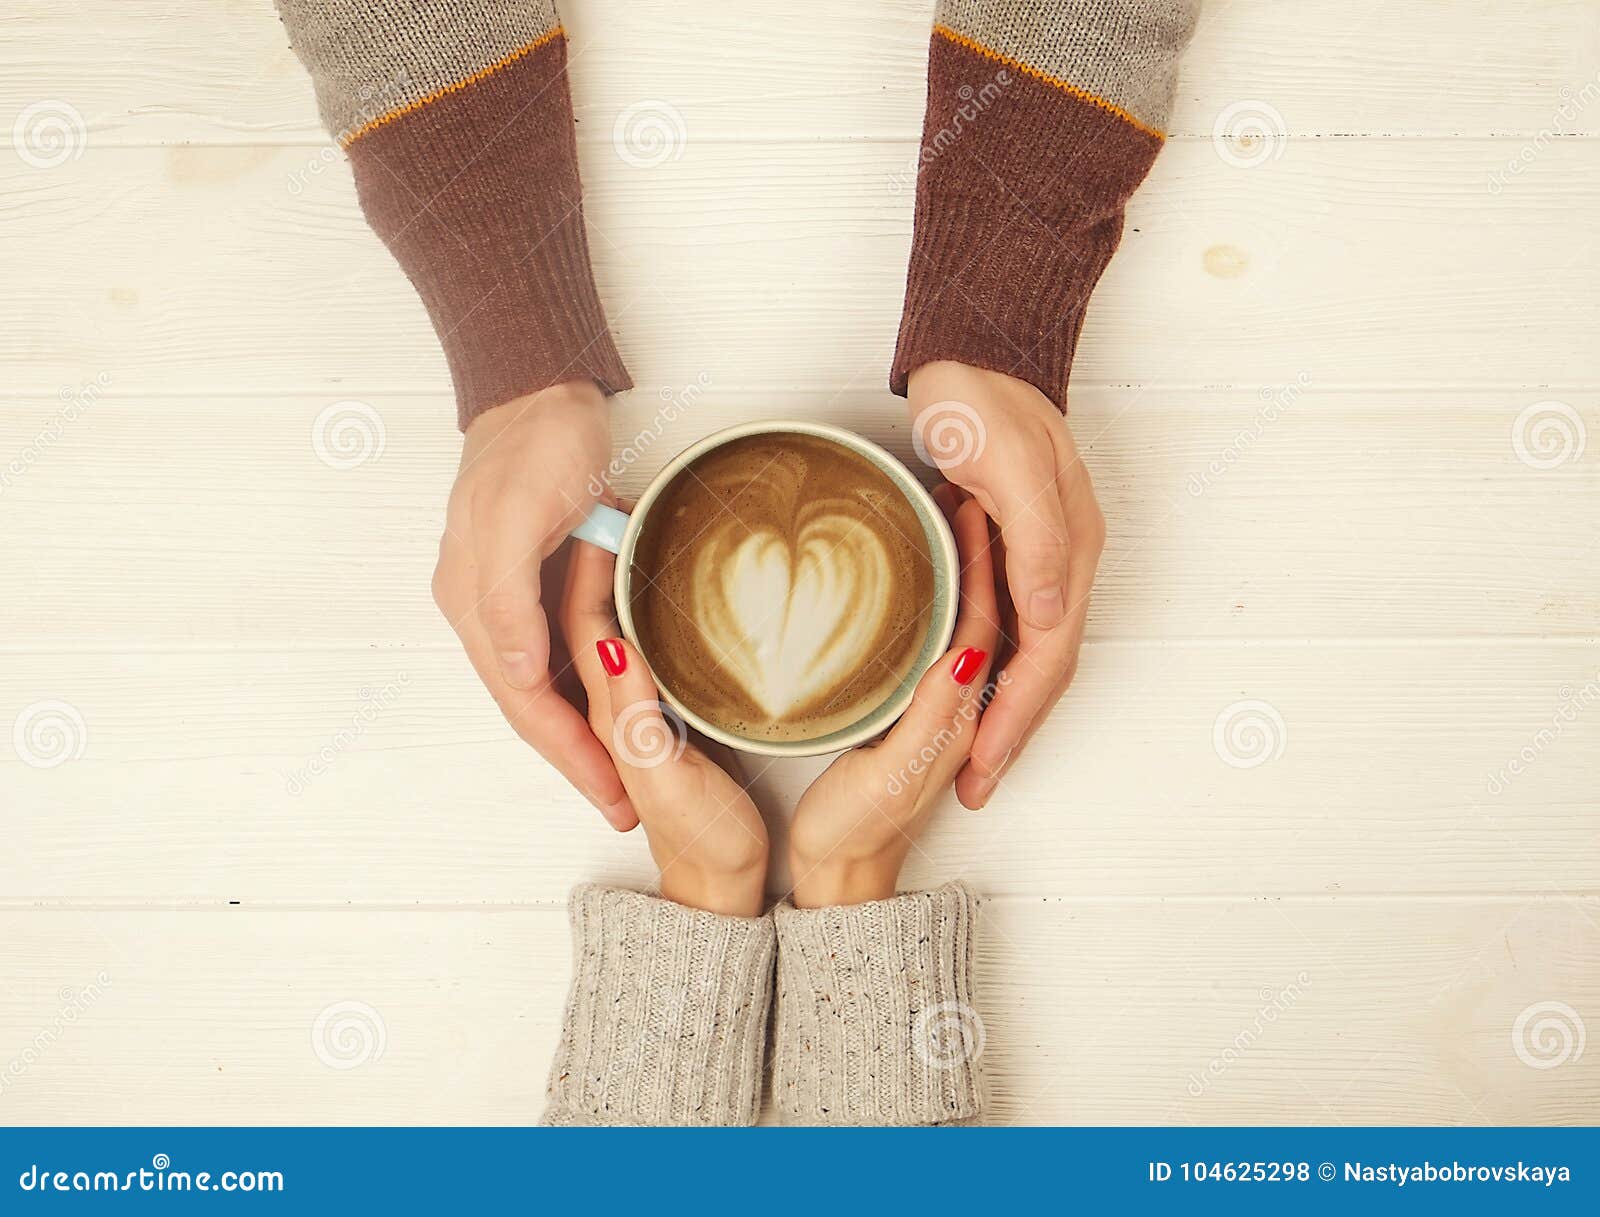 couple in love holding hands with cup of coffe top view image on white wooden background. man holds woman`s hand, love cosept.